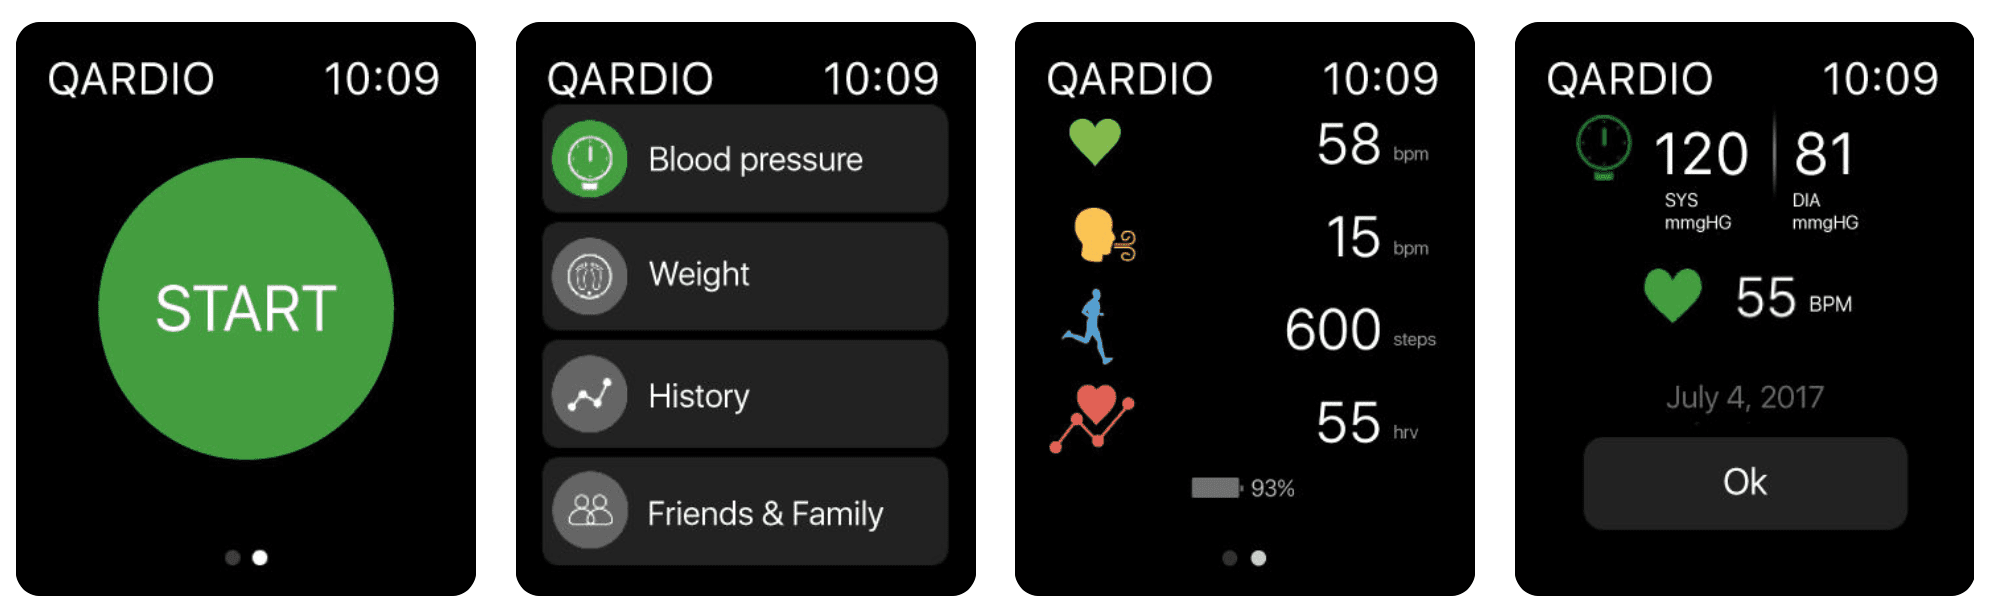 How to Use the Apple Watch Blood Pressure Feature